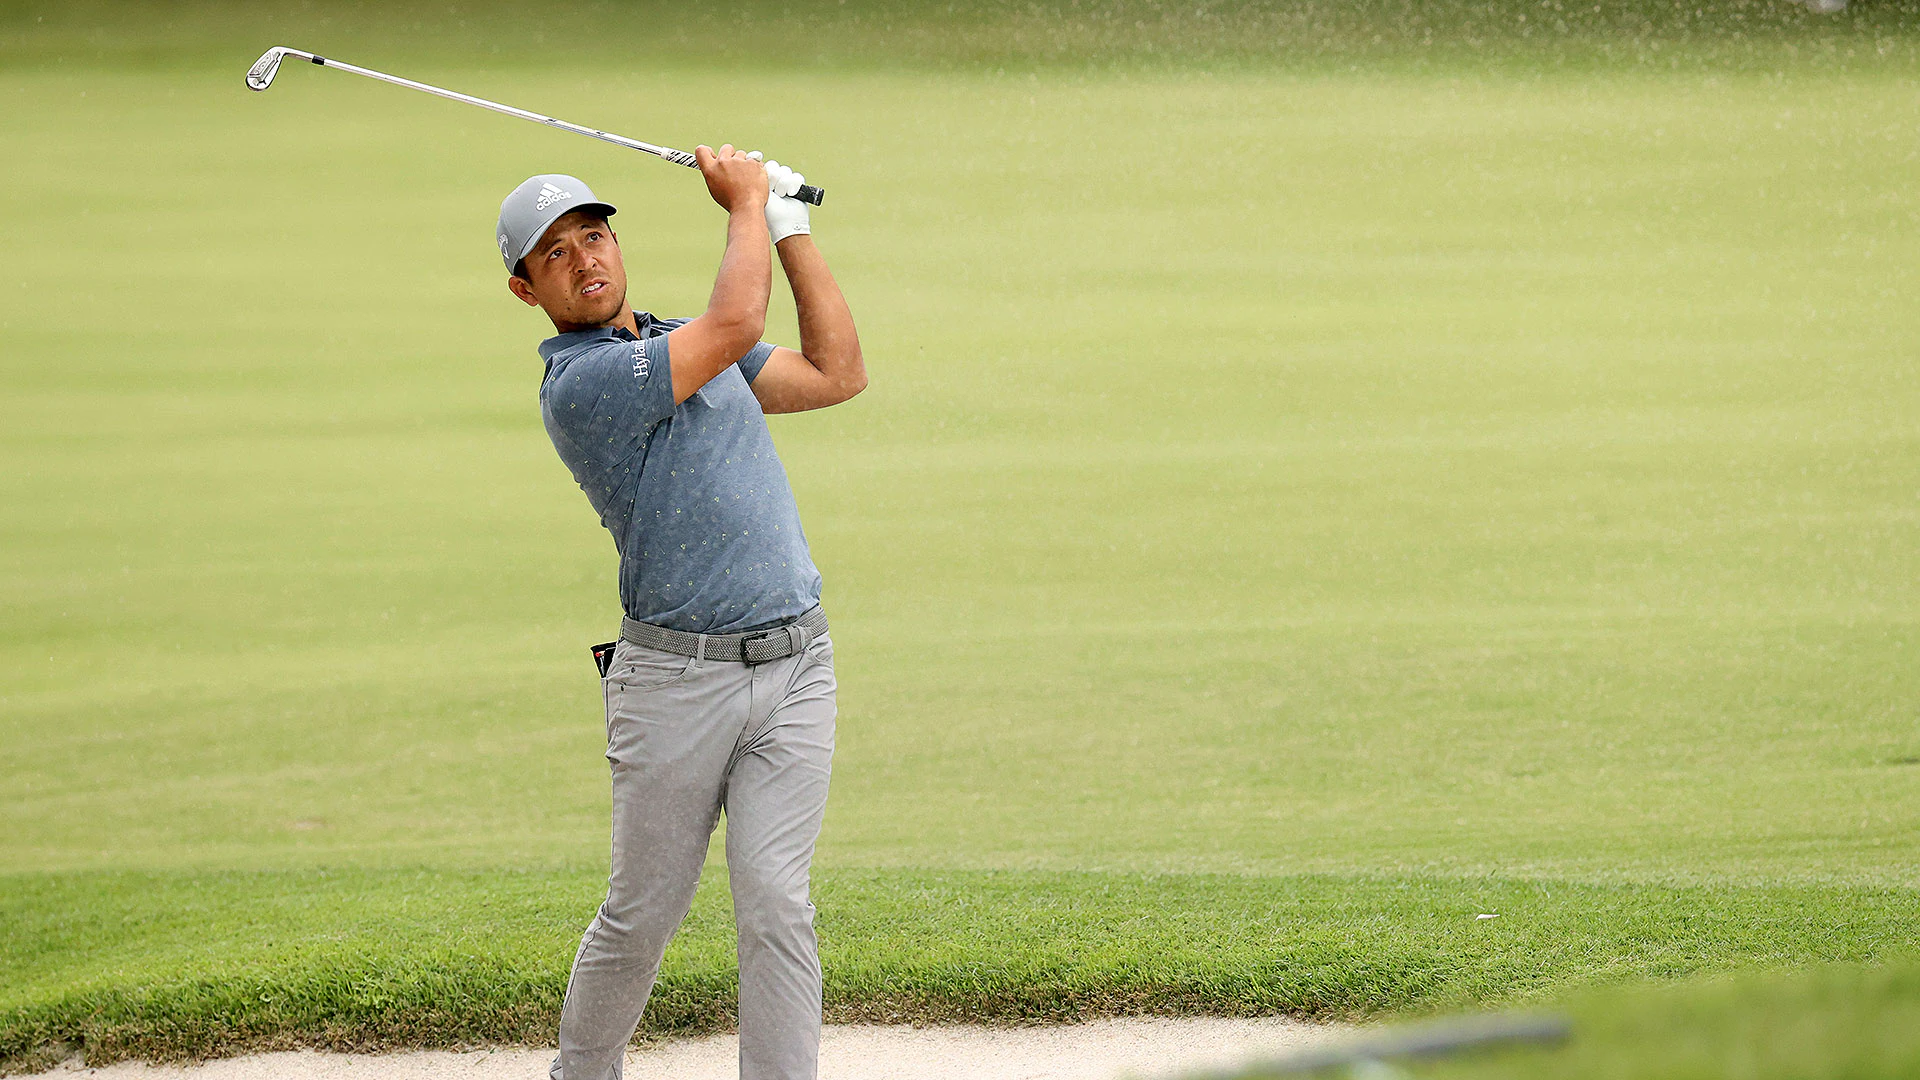 After fast Zozo start, Xander Schauffele falters and looks to figure out what went wrong